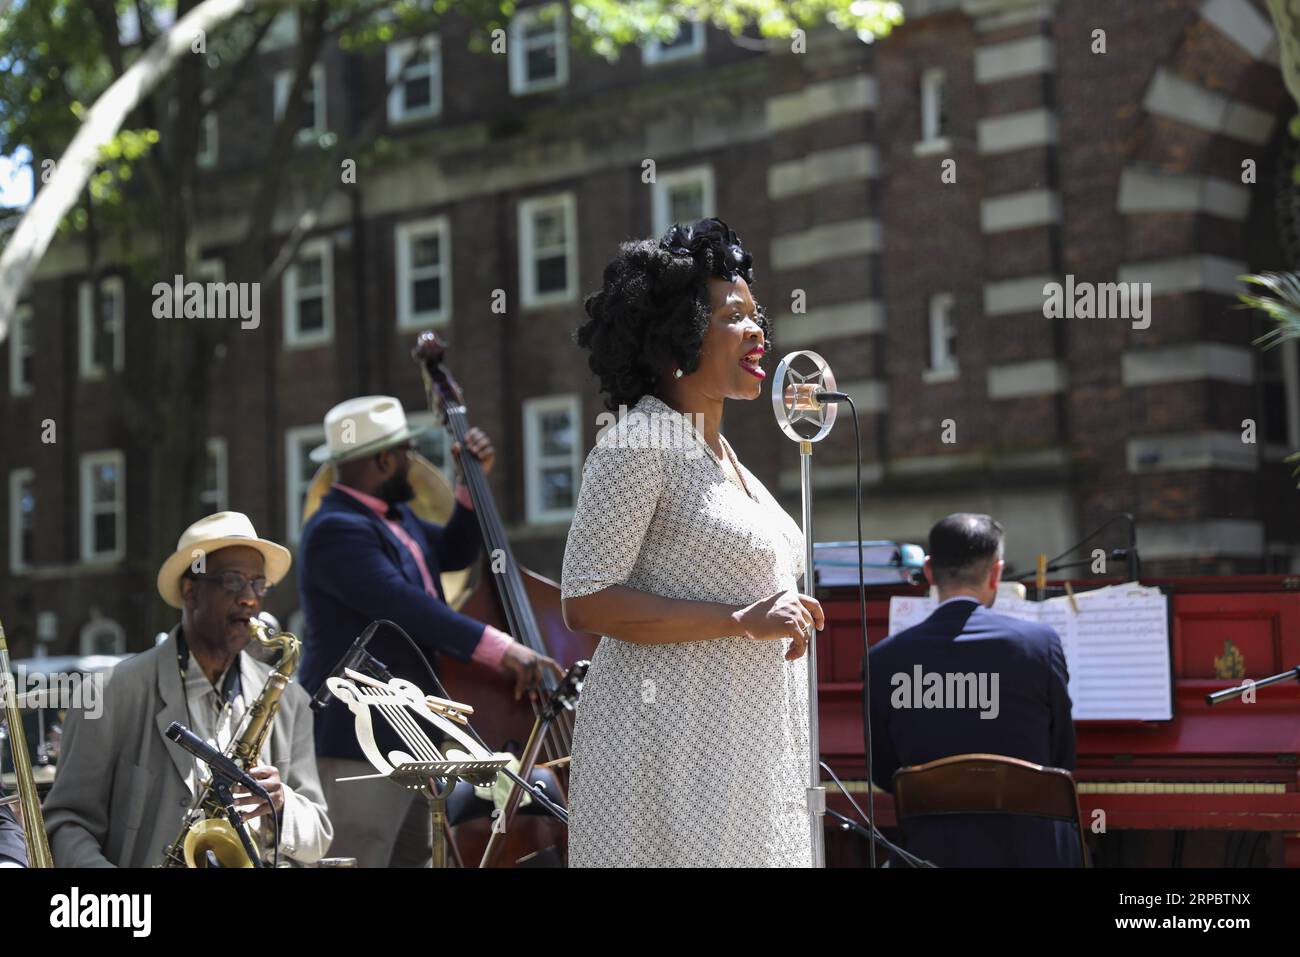 (190615) -- NEW YORK, June 15, 2019 (Xinhua) -- A band performs during the 14th annual Jazz Age Lawn Party on Governors Island of New York, the United States, on June 15, 2019. The event which kicked off on Saturday this year, started in 2005 as a small gathering on Governors Island and has since grown into one of New York s most popular events. Thousands of visitors come to the event each year to discover the music and zeitgeist of the 1920s. (Xinhua/Wang Ying) U.S.-NEW YORK-THE 14TH ANNUAL JAZZ AGE LAWN PARTY PUBLICATIONxNOTxINxCHN Stock Photo